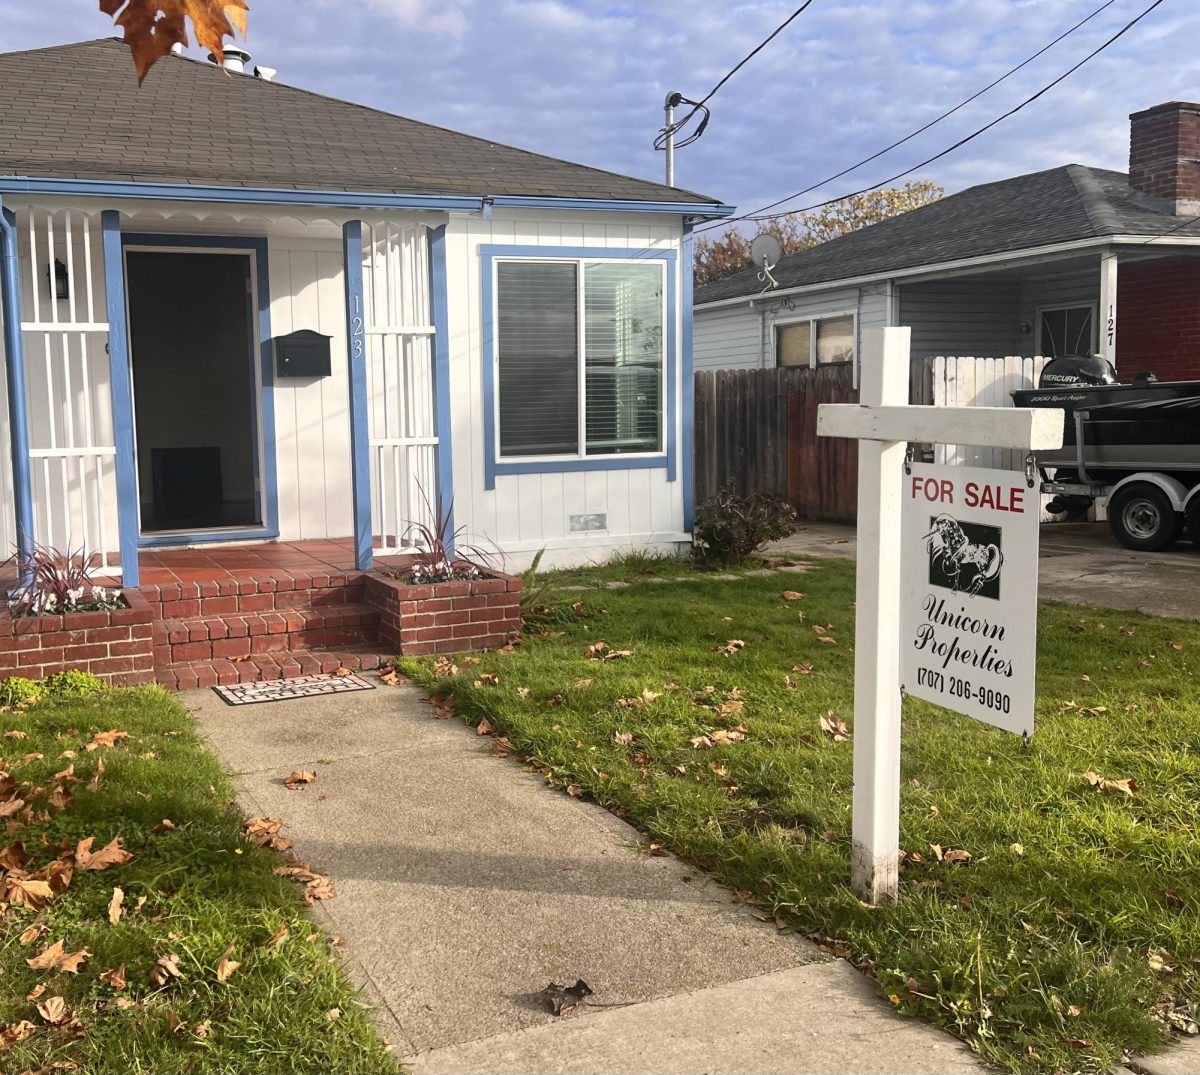 Inflation amidst home prices is a massive burden upon citizens looking to settle in the beloved Bay Area. Currently listed at  million, the bold price of this Alameda property reflects the difficulty of home hunting.